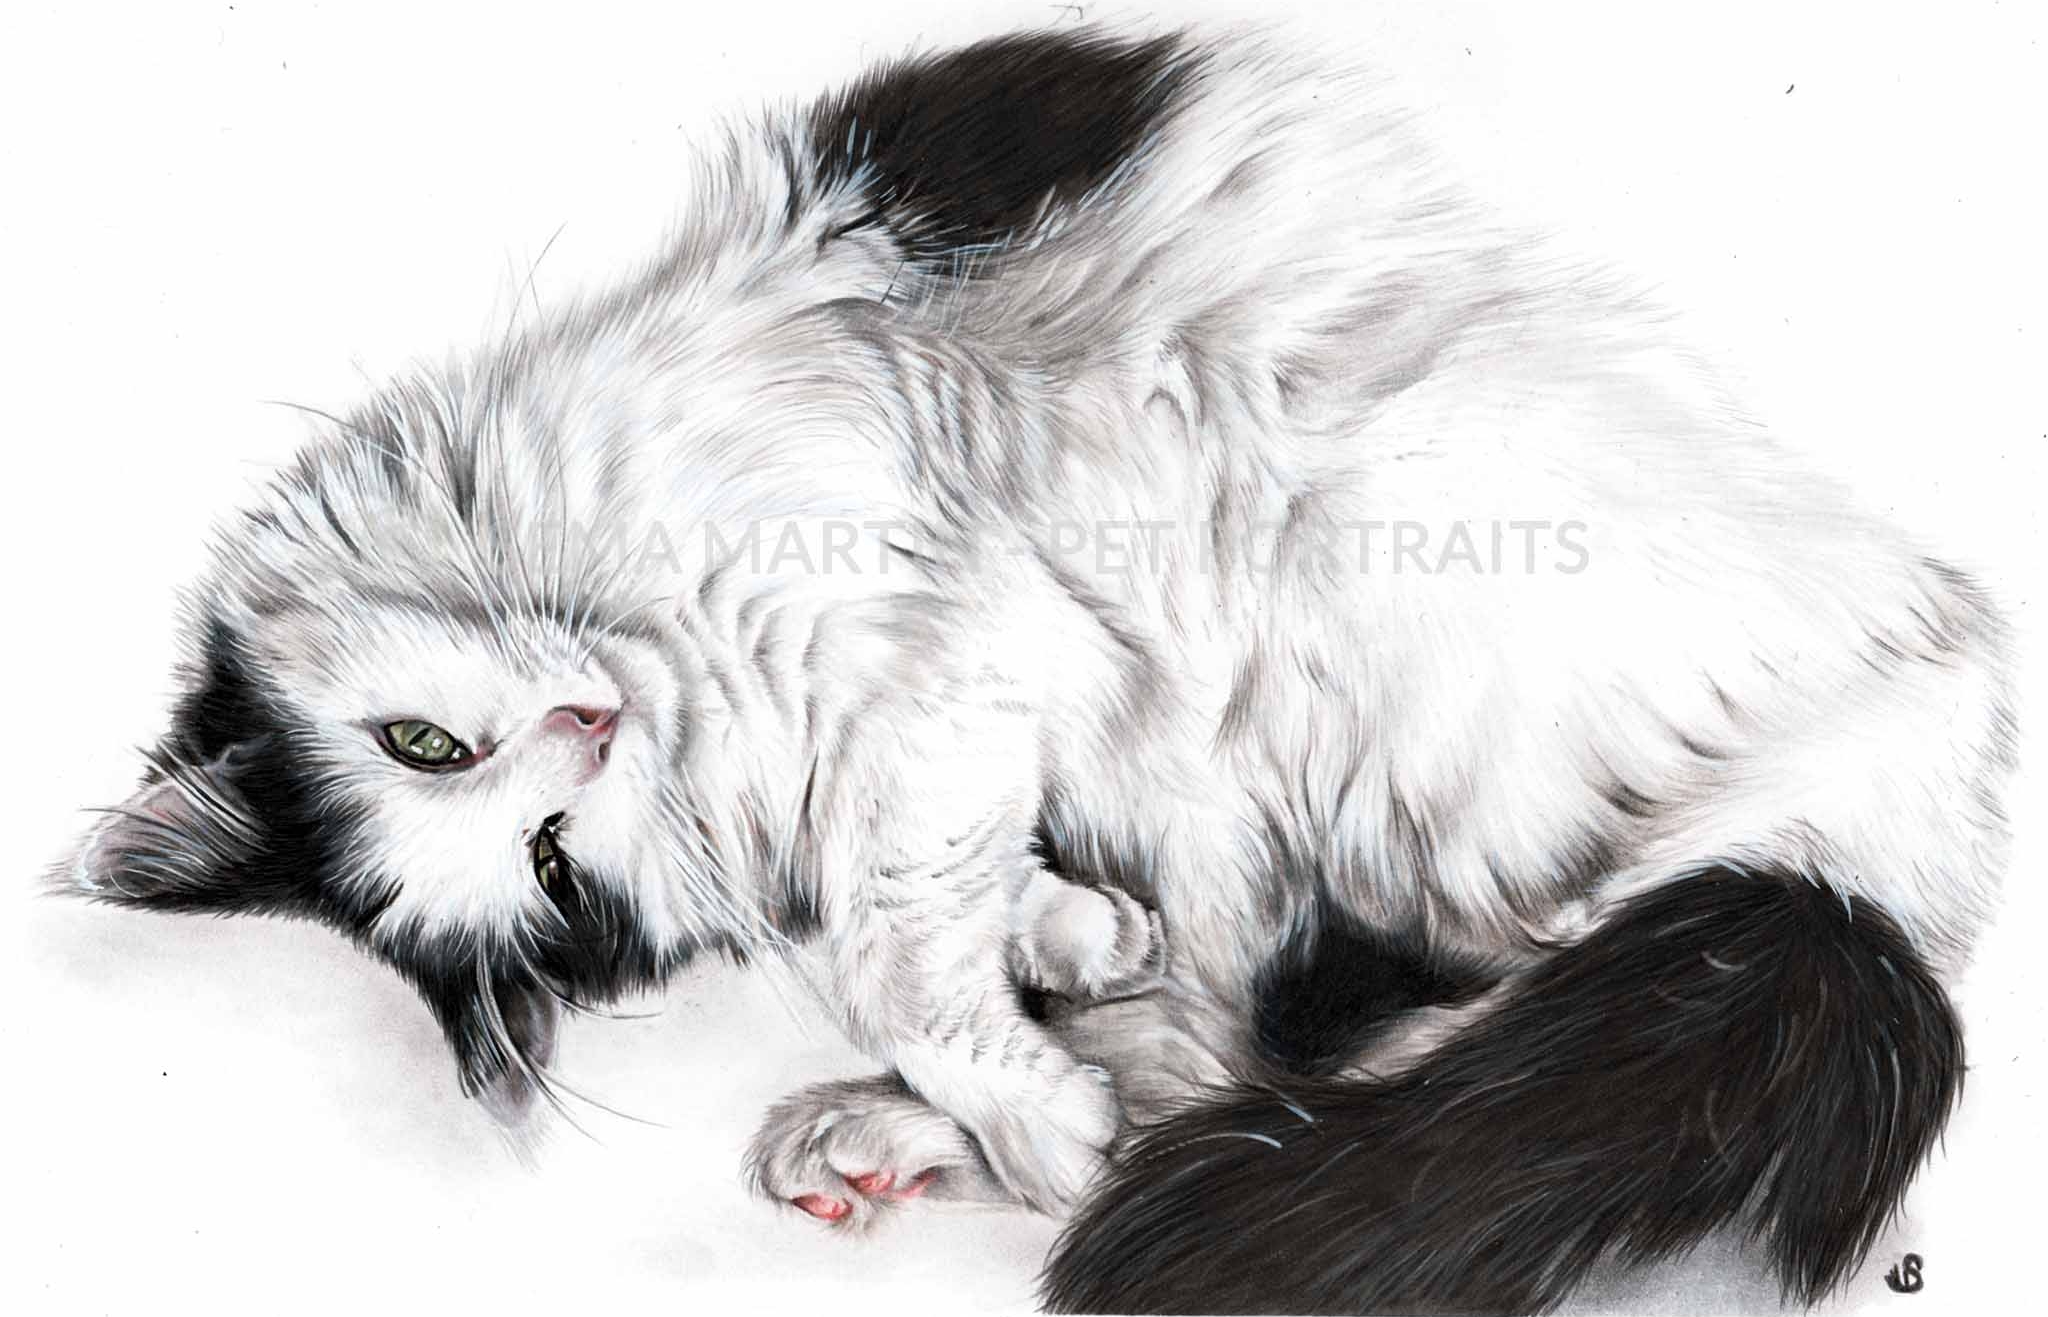 colour pencil portrait of black and white cat from new zealand